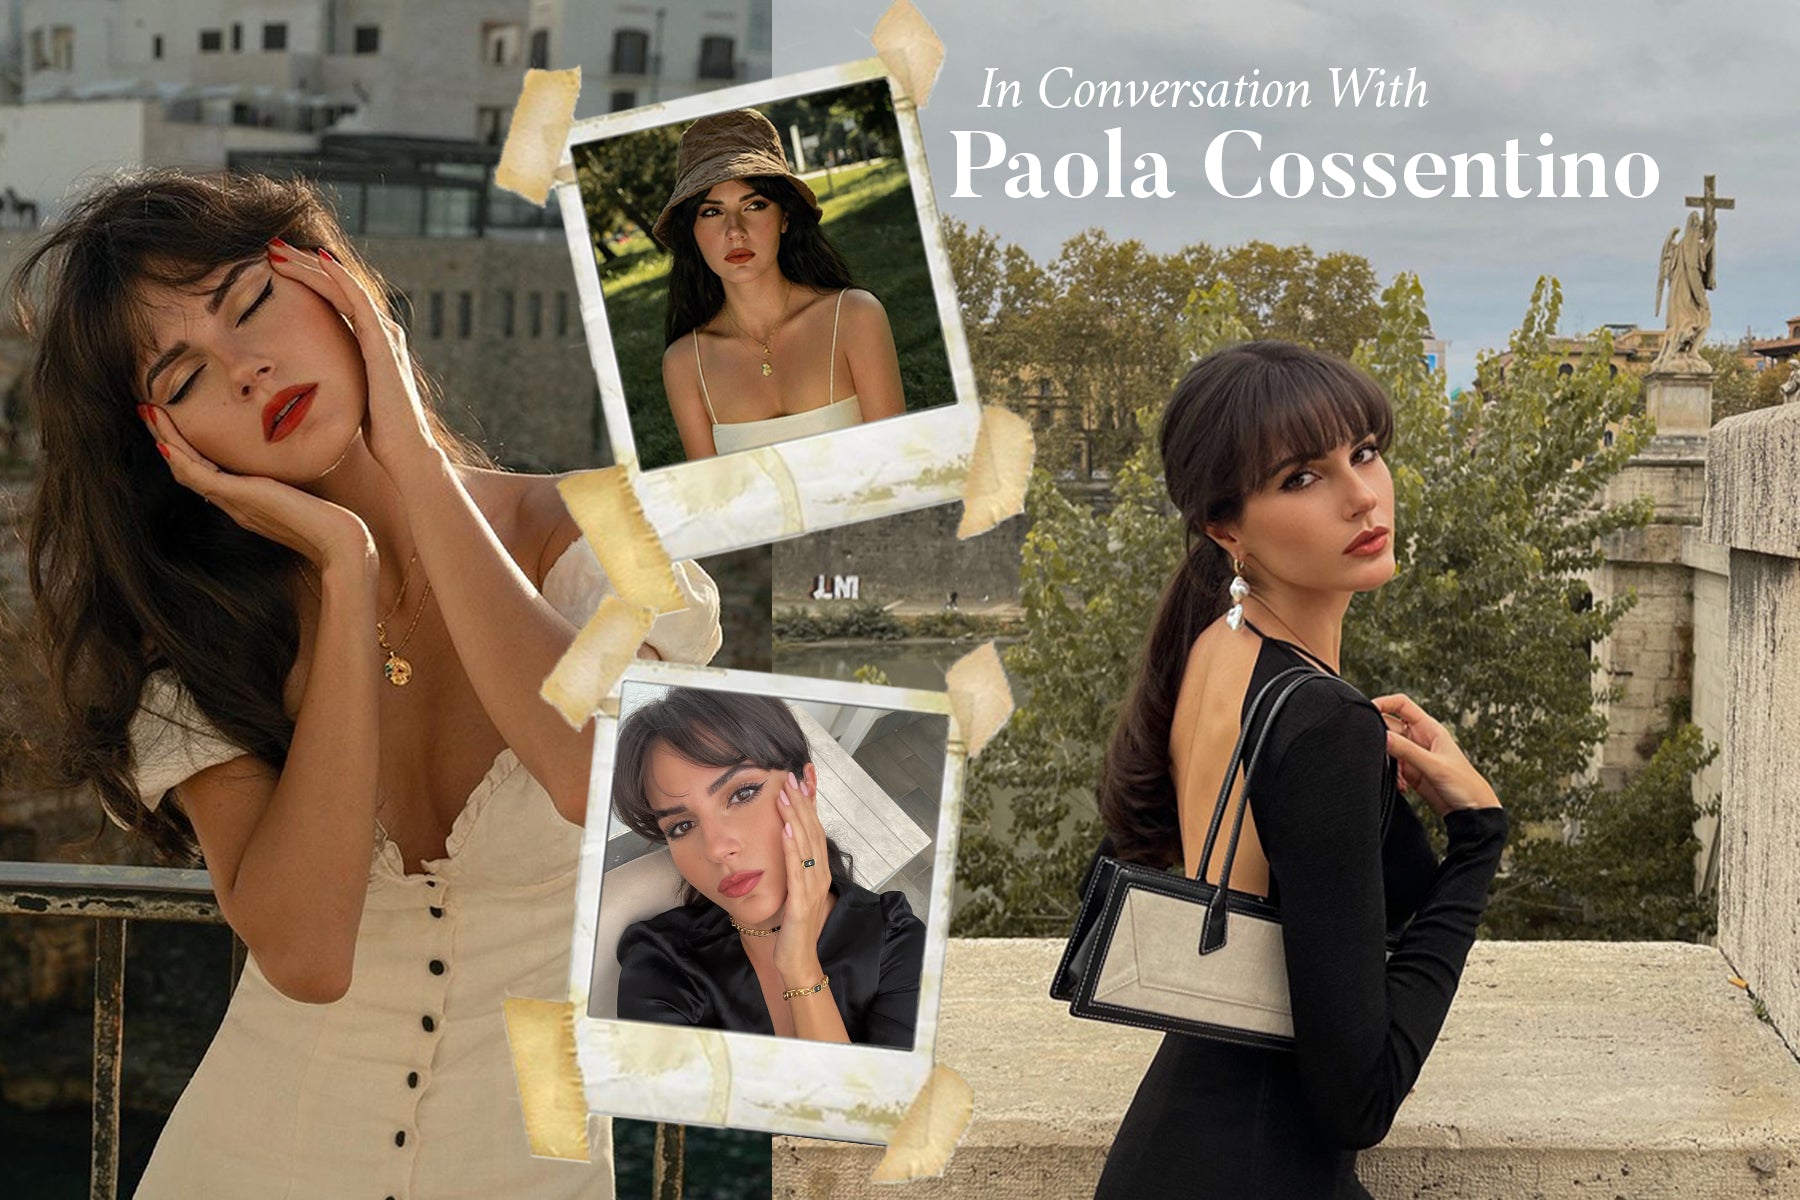 In Conversation with: Paola Cossentino